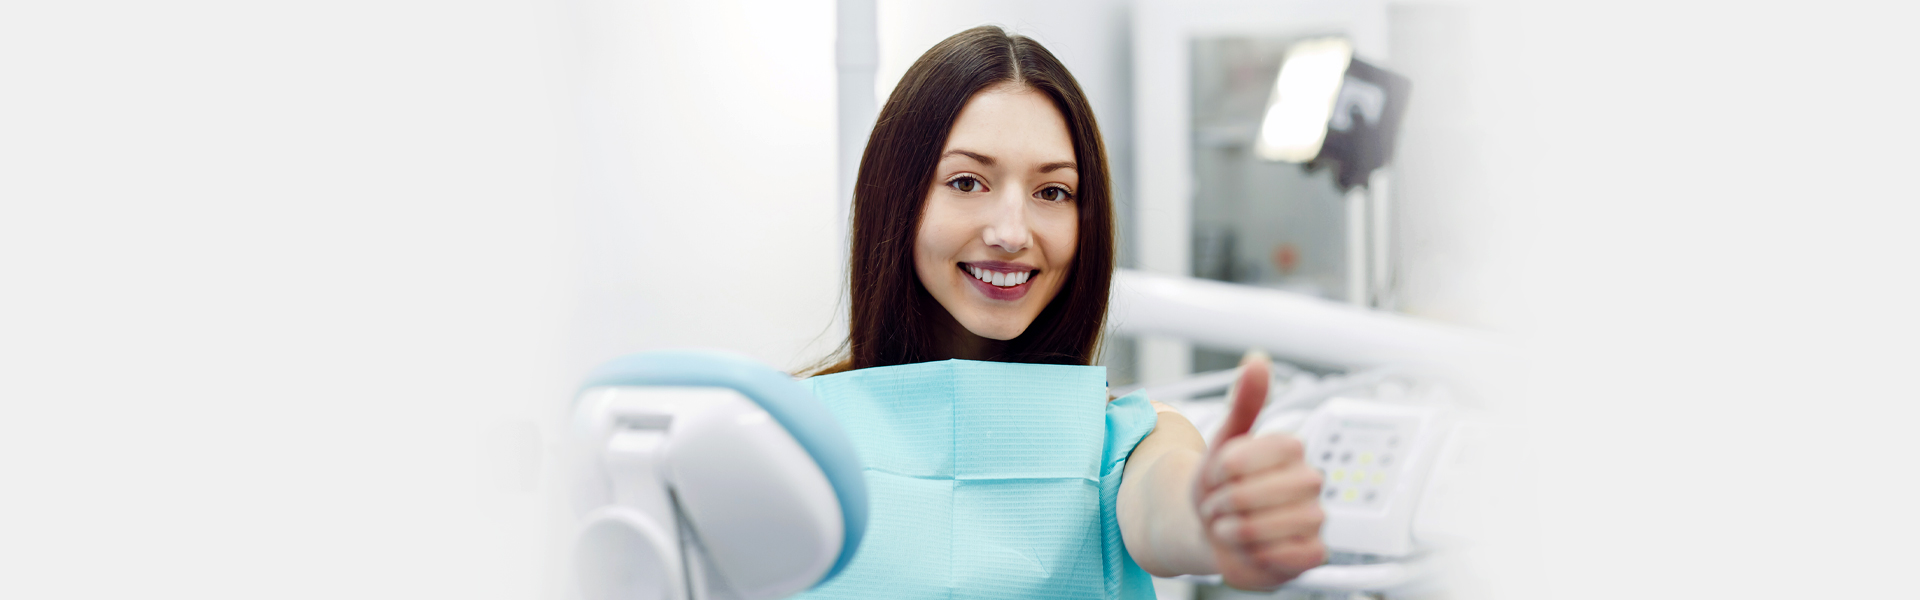 The Benefits of Restorative Dentistry for Your Oral Health